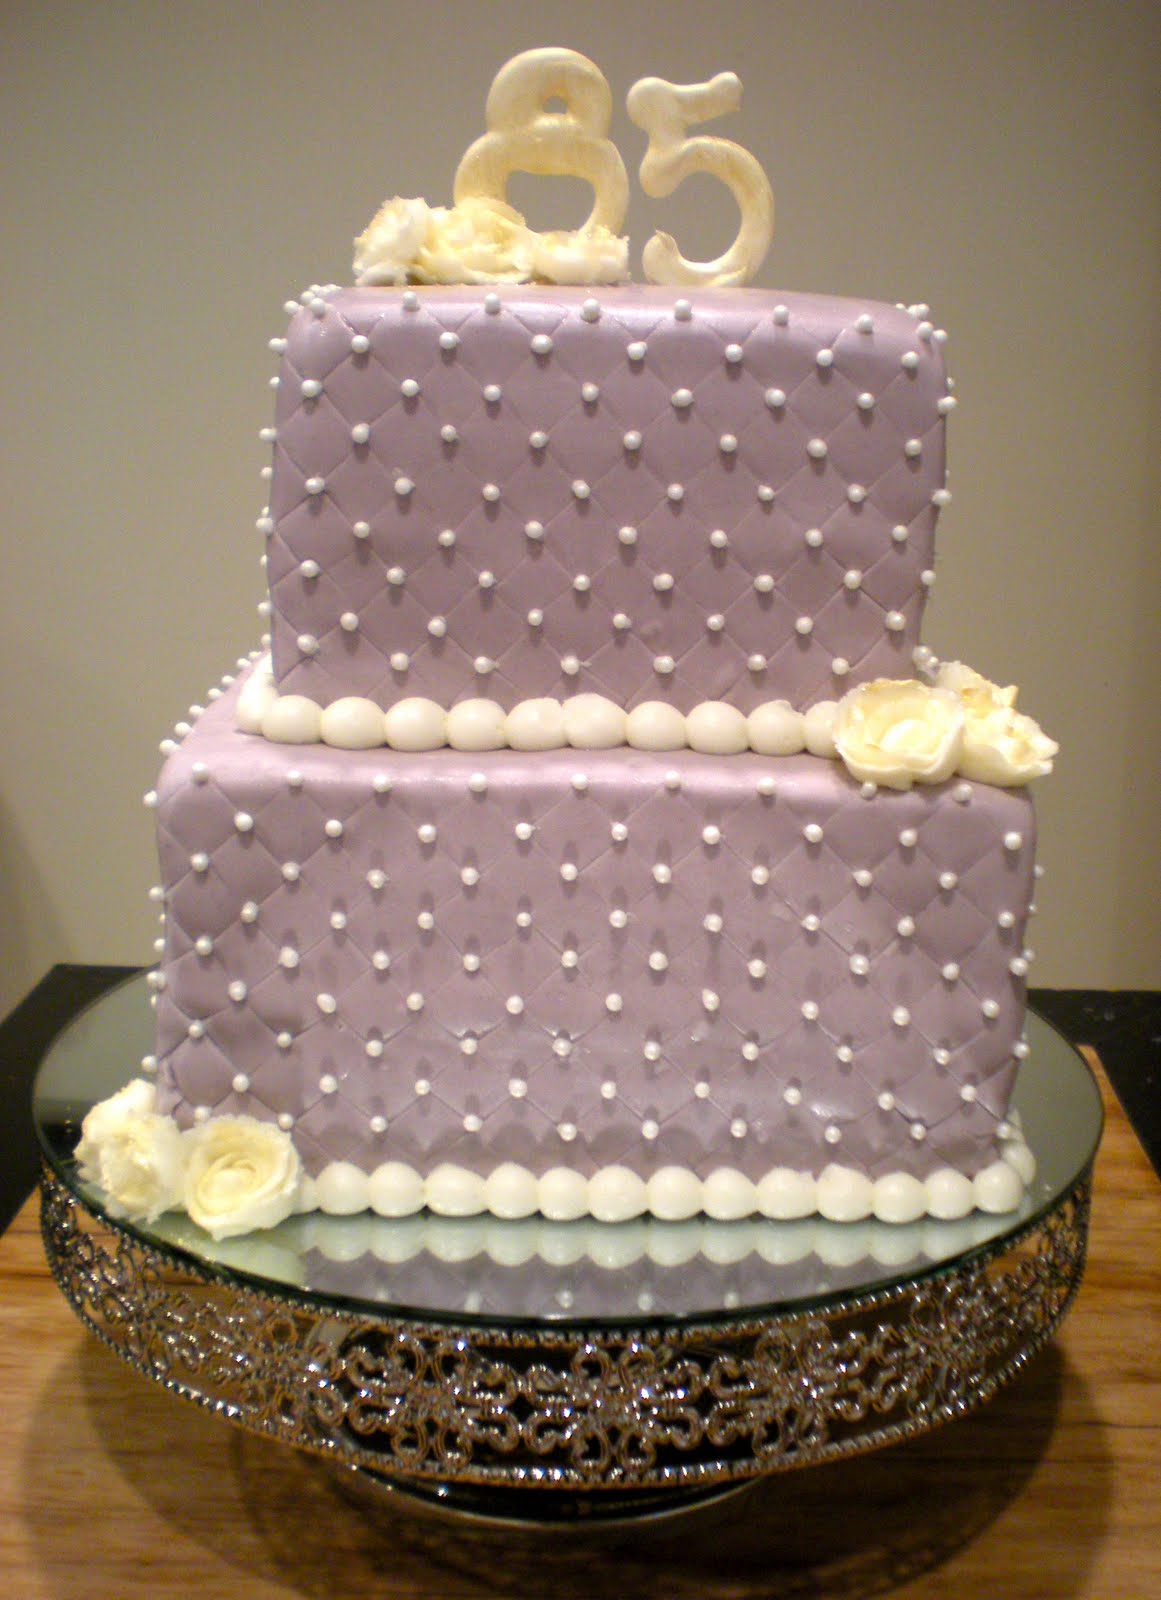 Chandelier Cakes by Natalie Peterson 85th Birthday Cake for my Cute